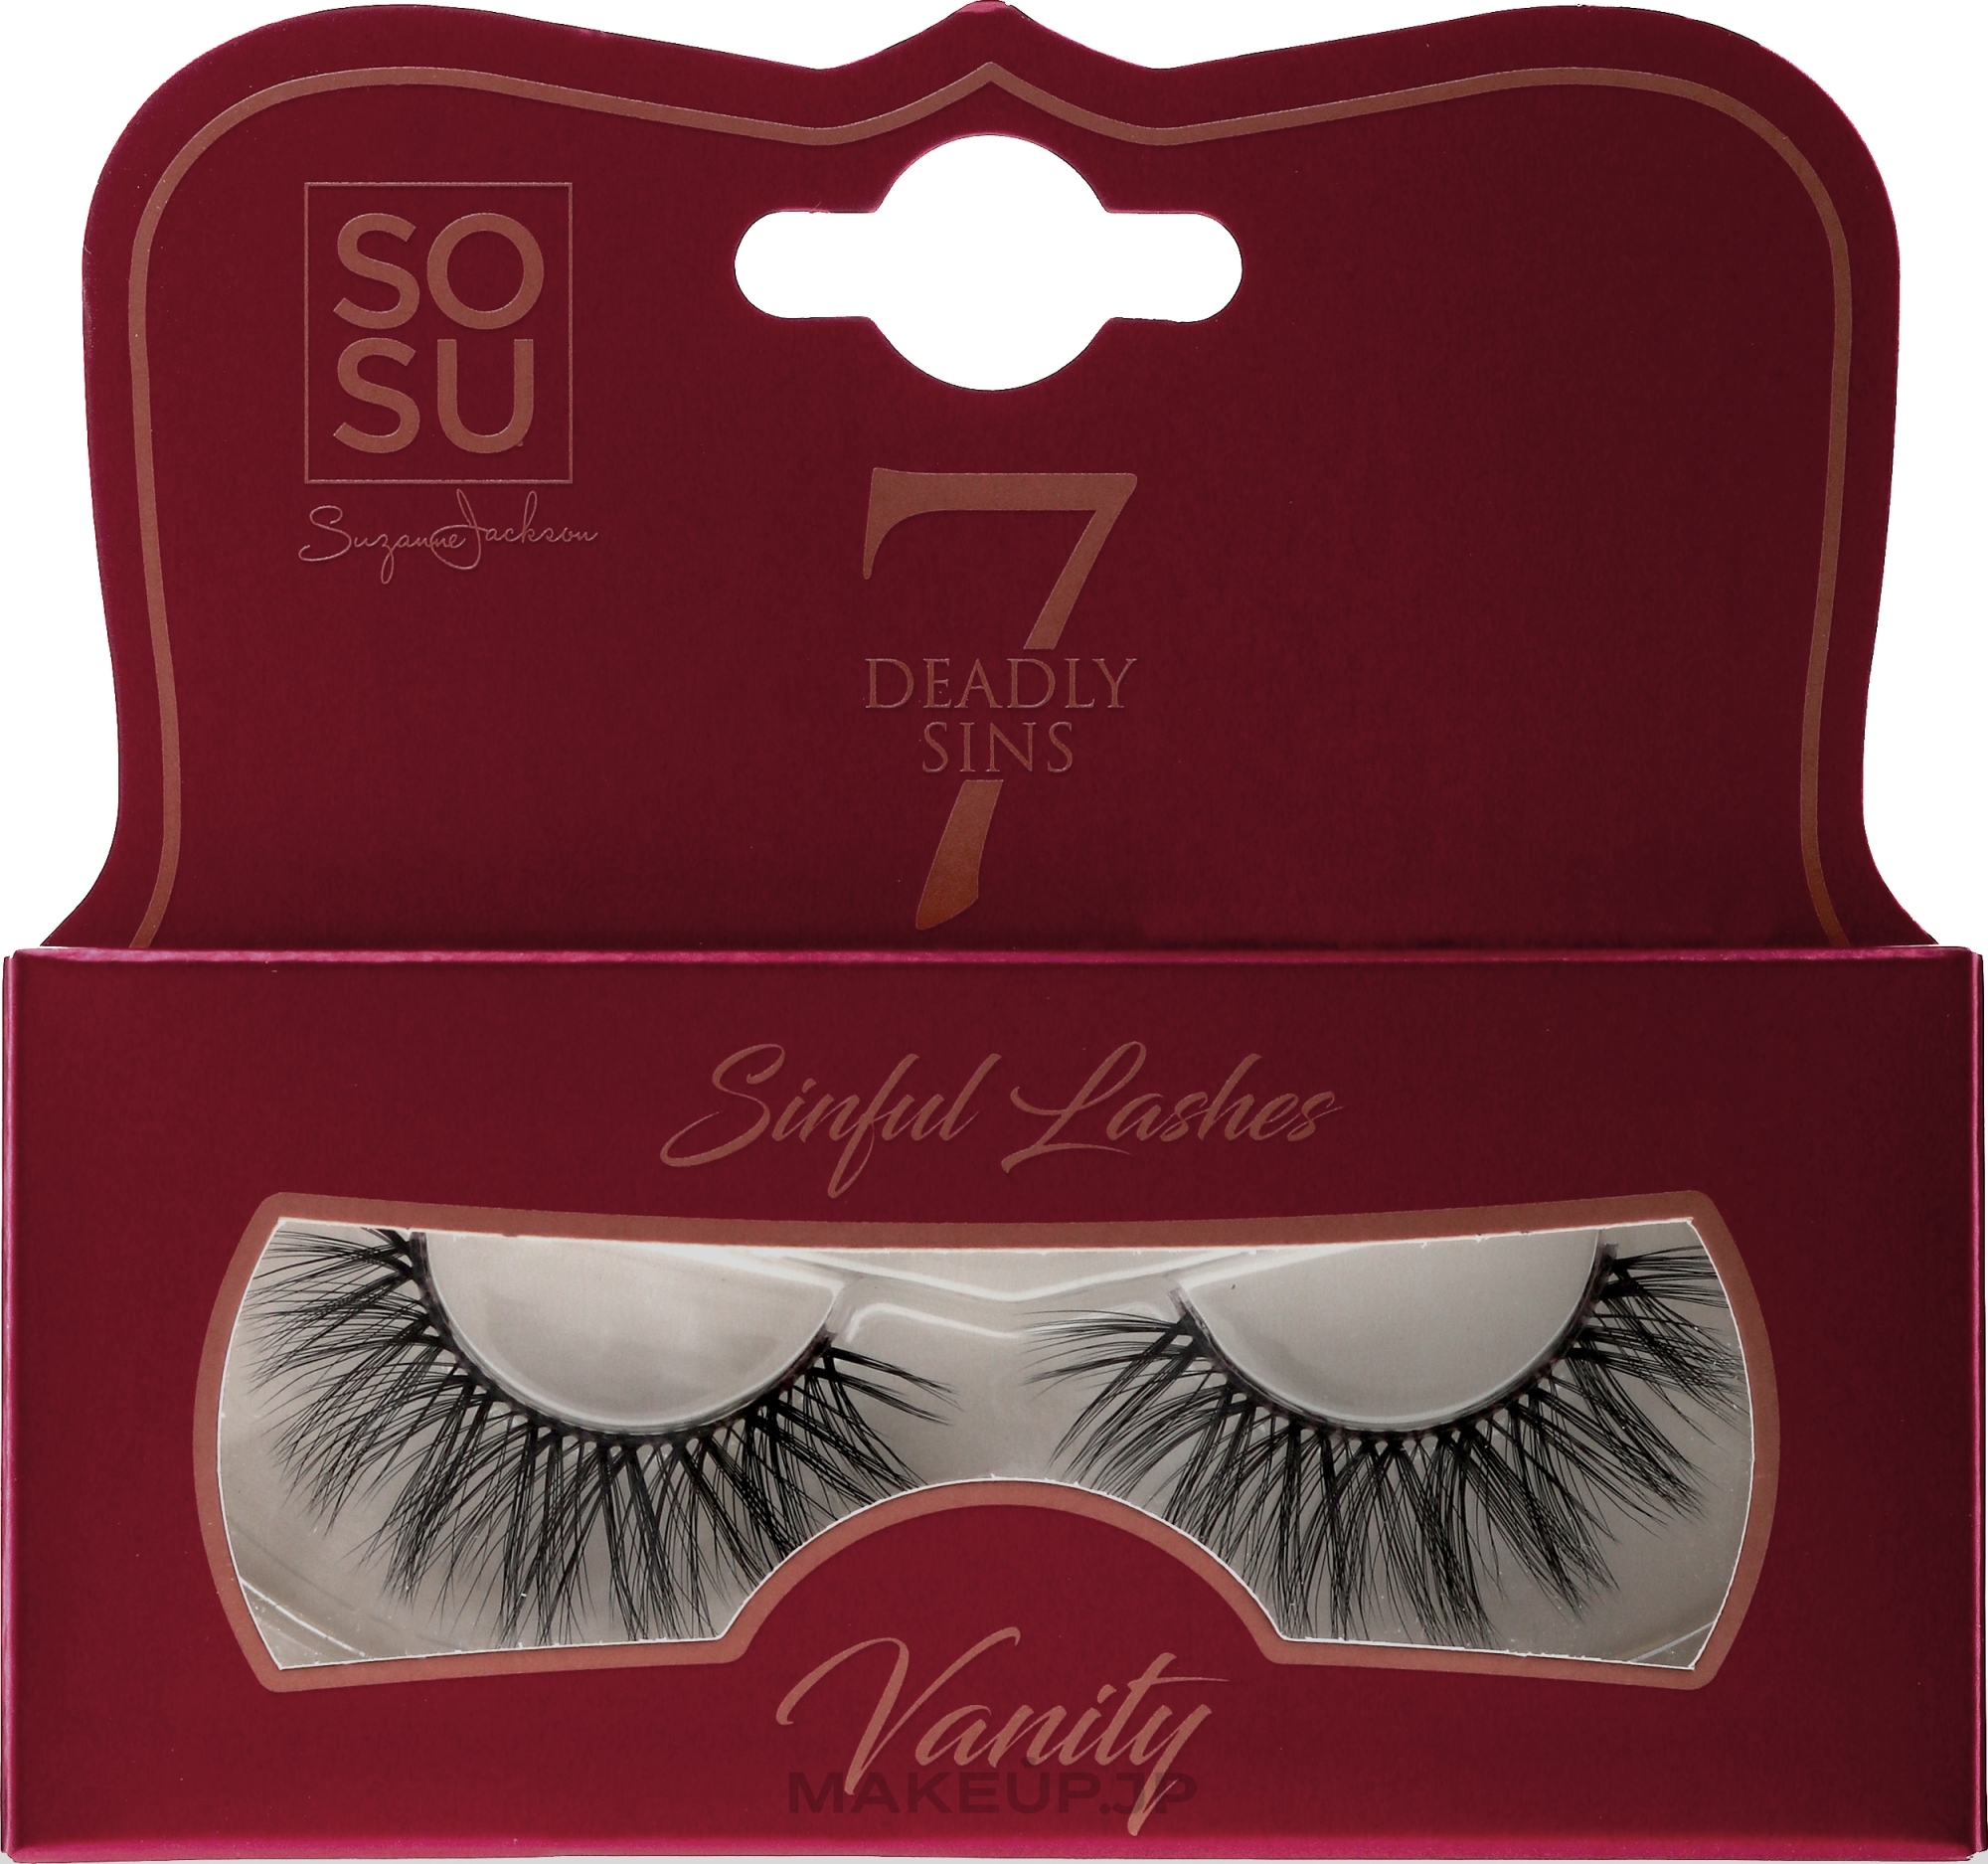 False Lashes "Greed" - Sosu by SJ 7 Deadly Sins Sinful Lashes — photo 2 szt.